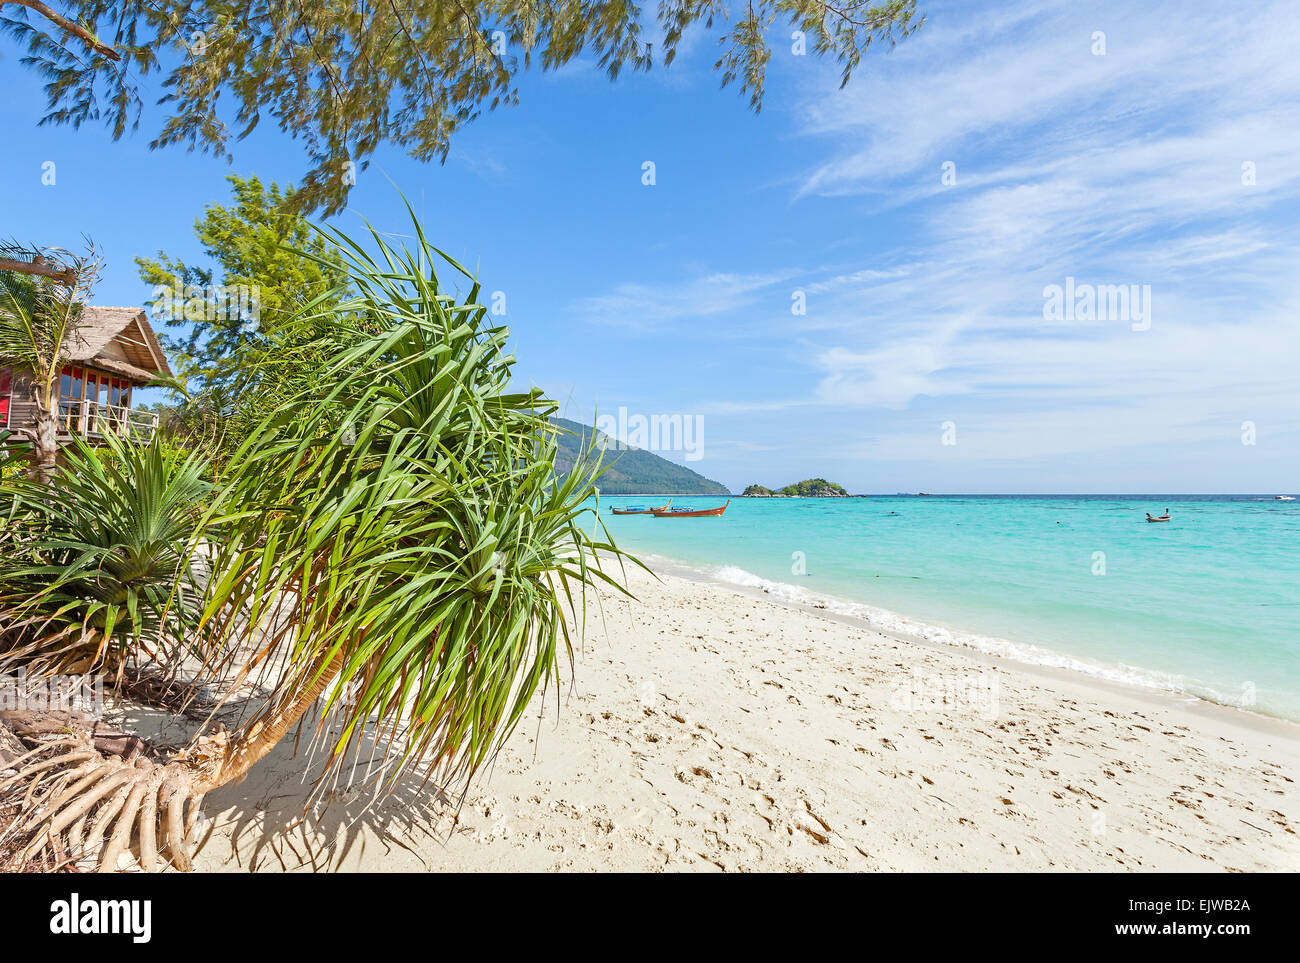 Bungalow by a pristine beach, summer paradise background. Stock Photo